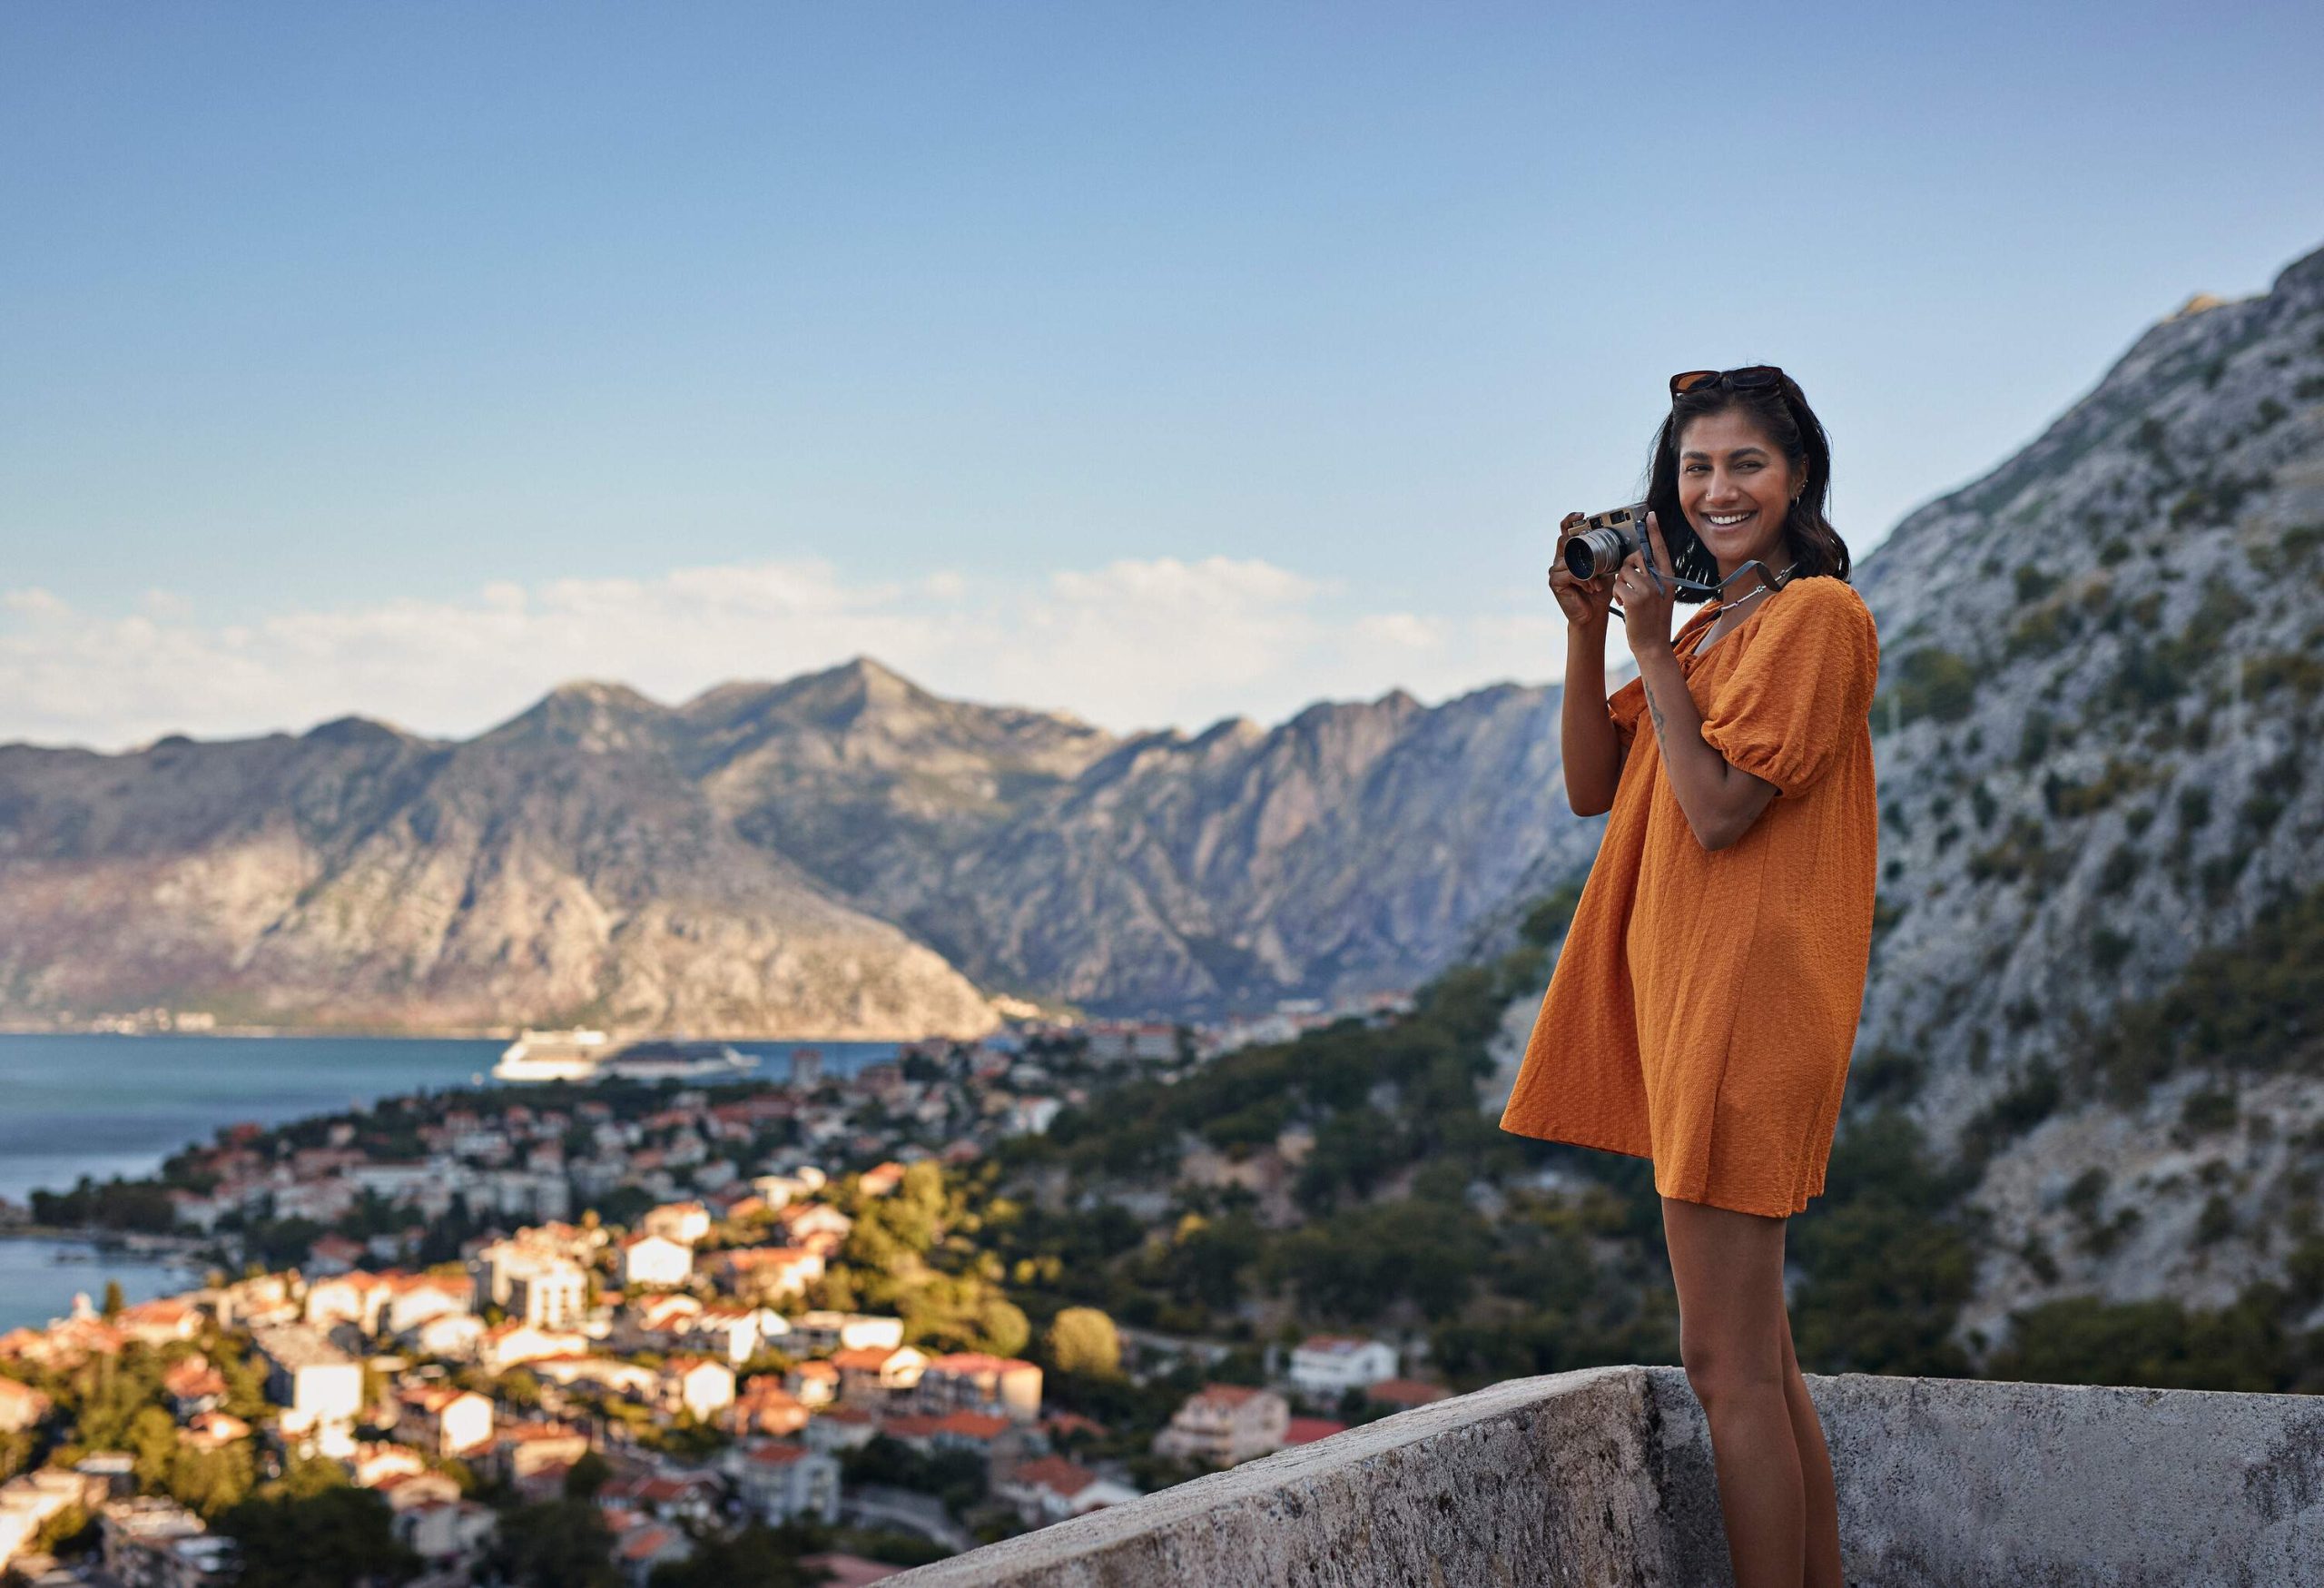 A woman in an orange dress smiling while holding a camera against a backdrop of a seaside town.